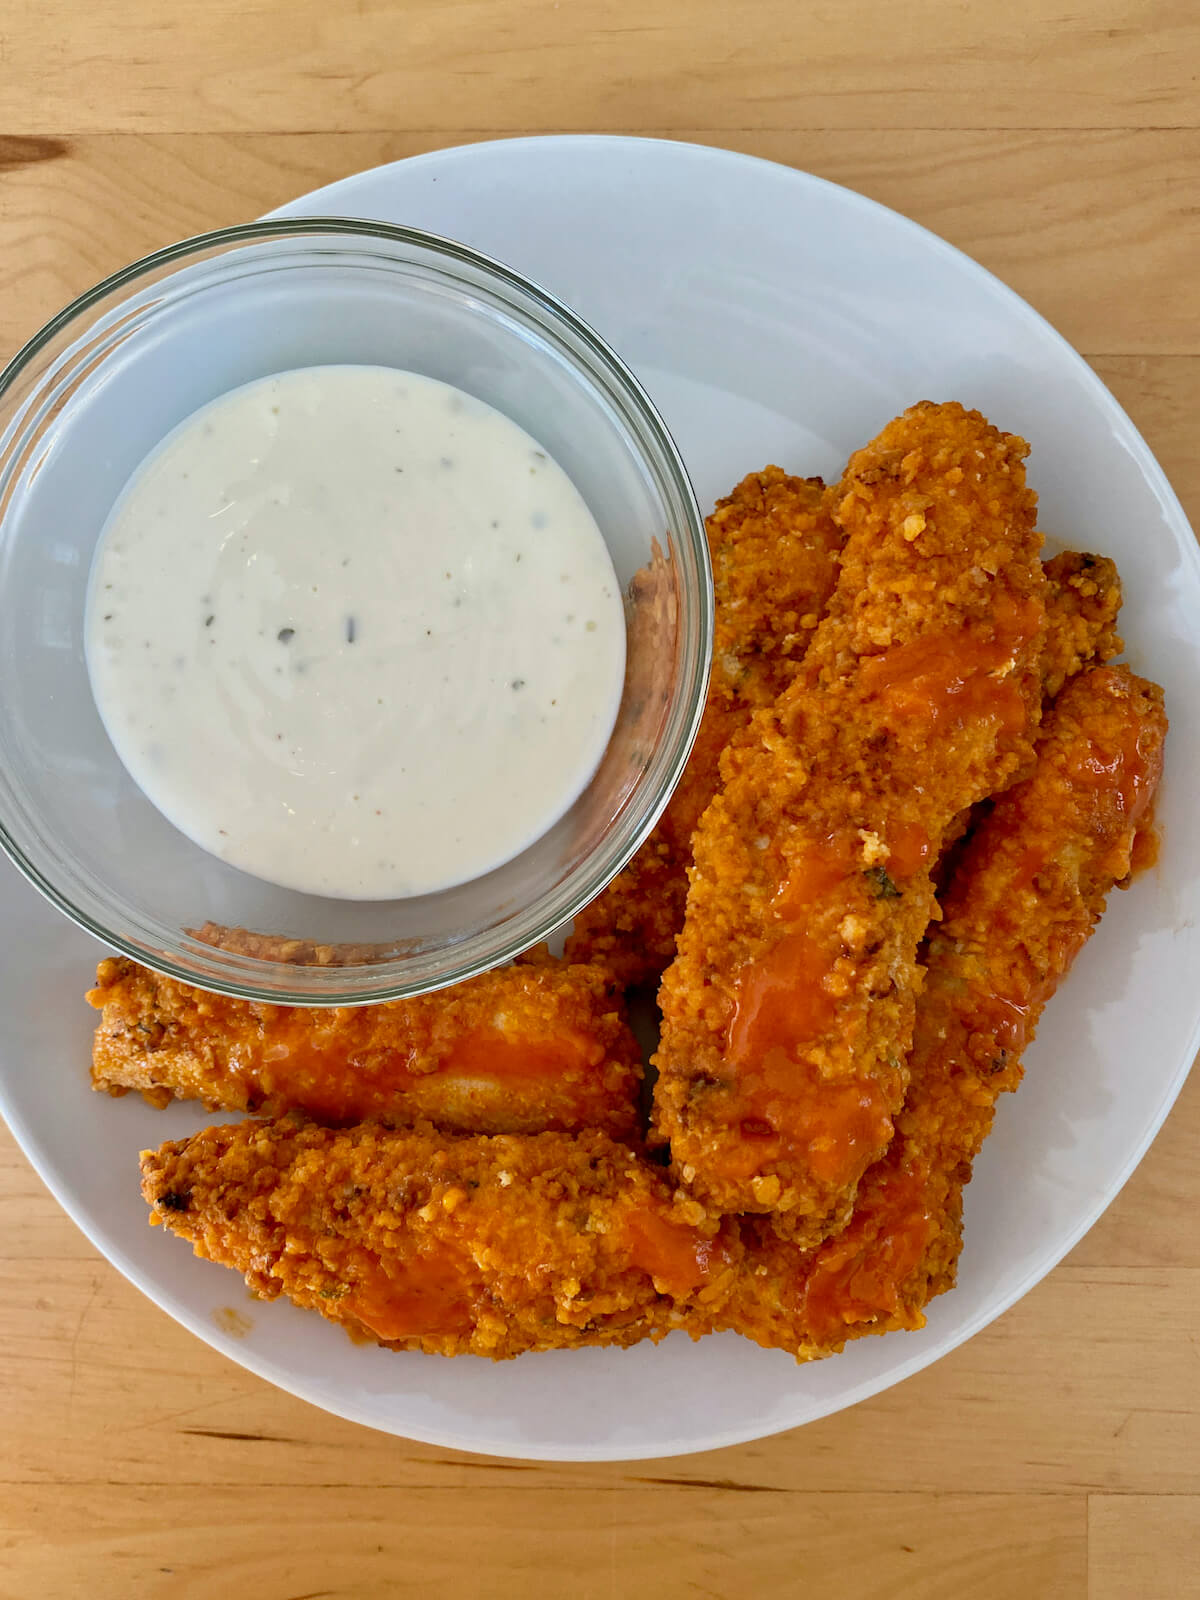 Air fryer chicken tenders after being coated in buffalo sauce.